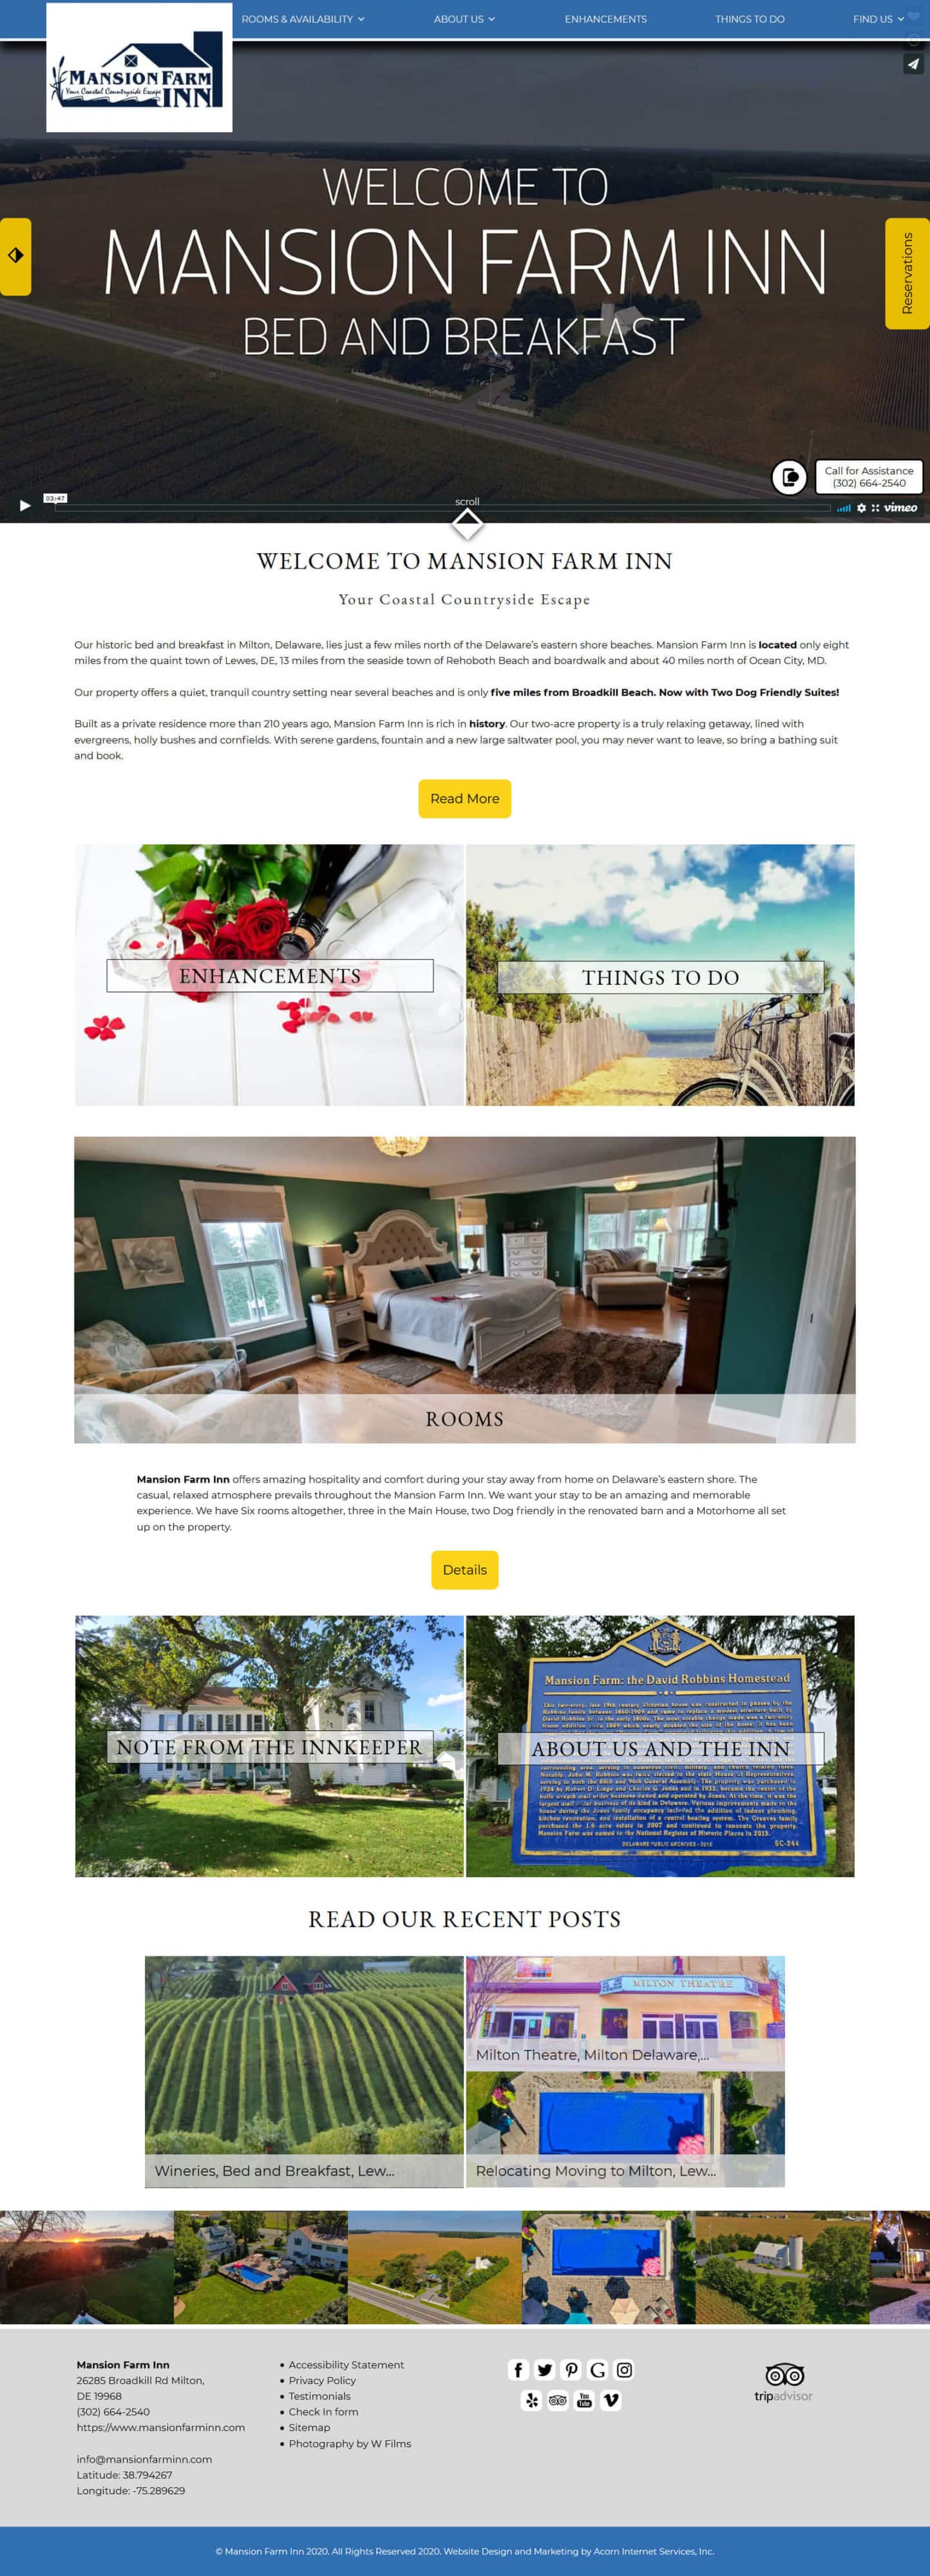 Mansion Farm Inn - new Deluxe website by Acorn IS - screenshot of home page 